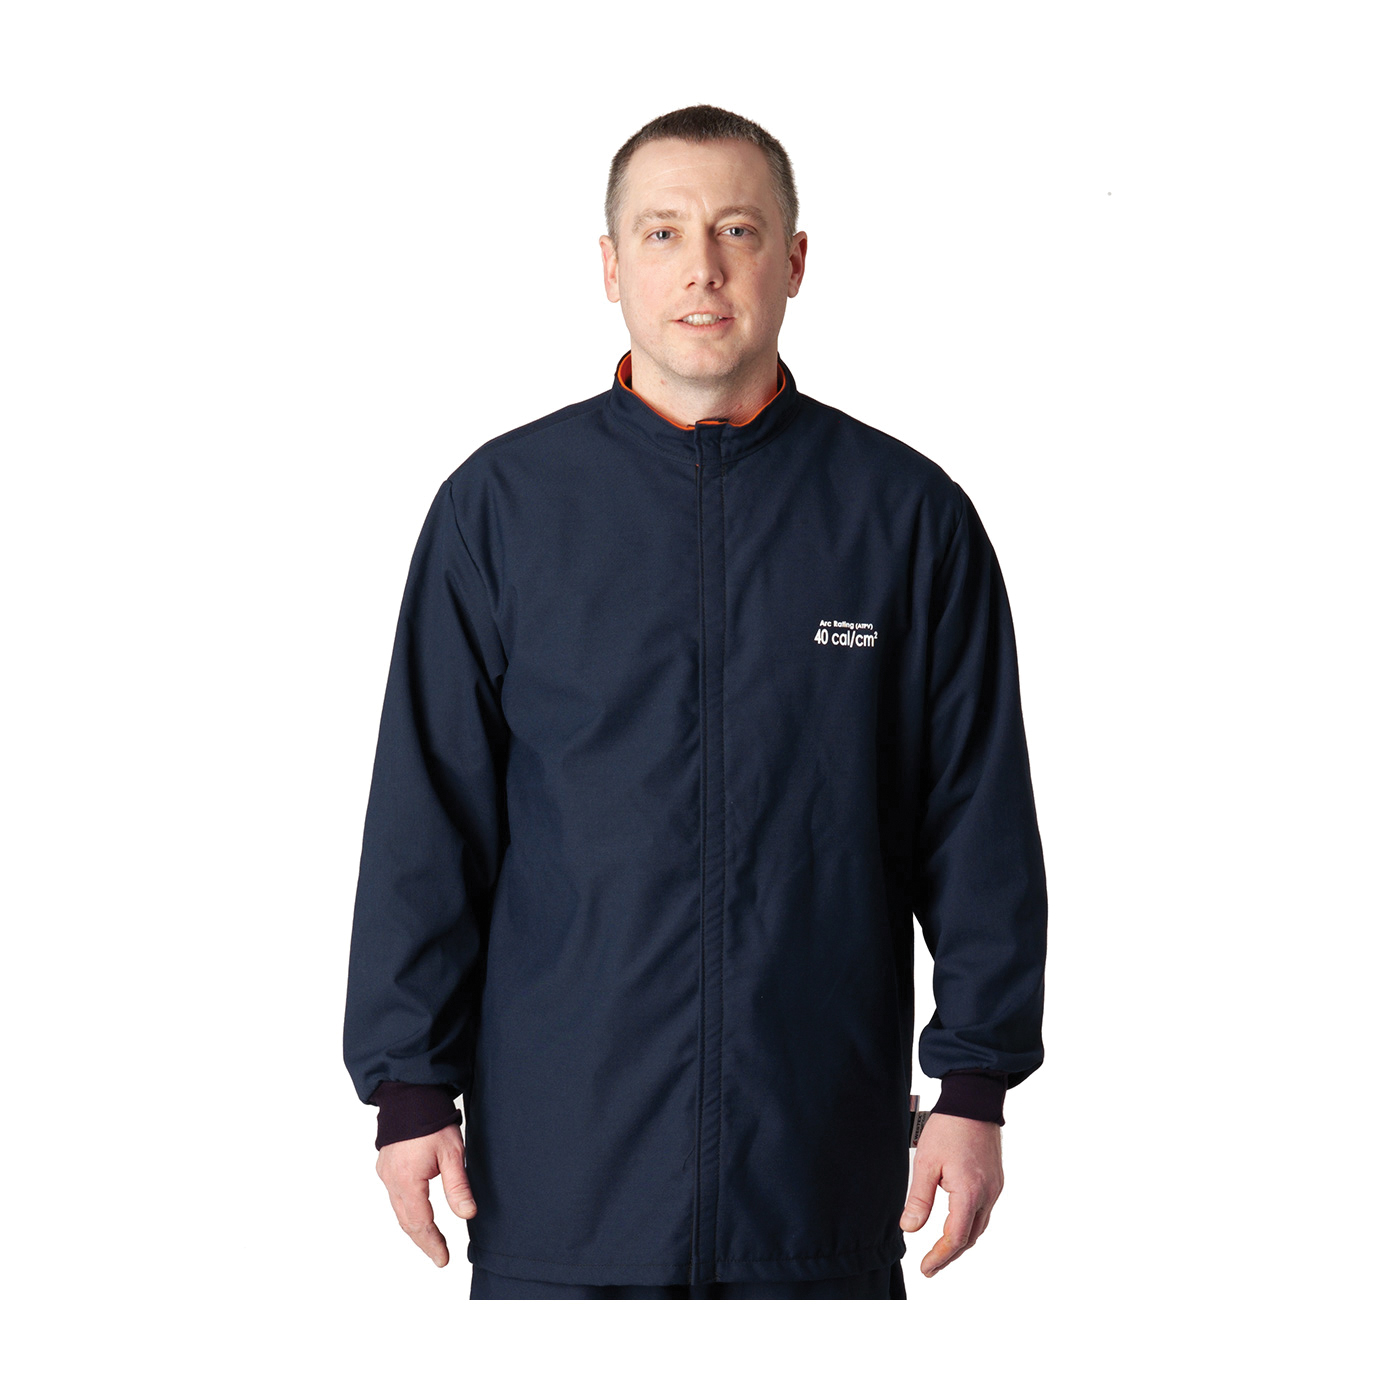 PIP® 9100-524ULT/M Ultra Light Arc and Flame Resistant Jacket, M, Navy Blue, DuPont™ Protera®/Westex® Ultrasoft, 40 to 42 in Chest, Resists: Arc and Flame, ASTM F1506-10a, ASTM F2178-12